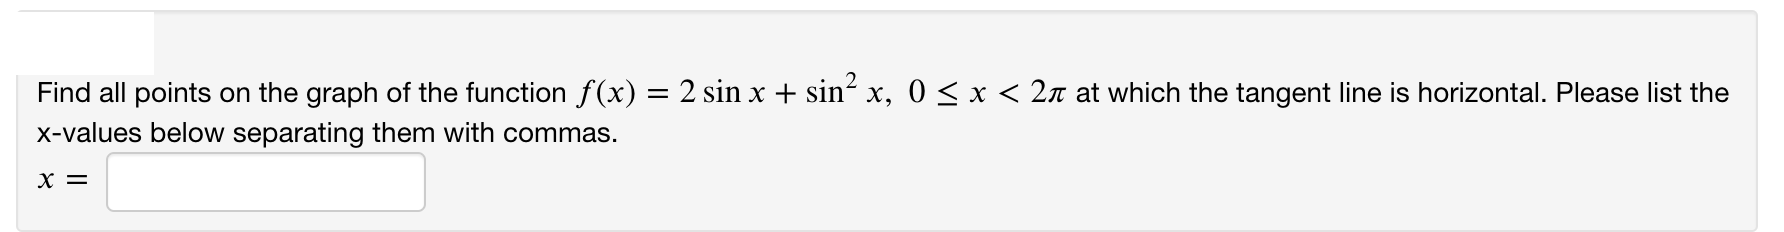 Find all points on the graph of the function f (x) = 2 sin x + sin x, 0 < x < 2n at which the tangent line is horizontal. Please list the
x-values below separating them with commas.
х %3
